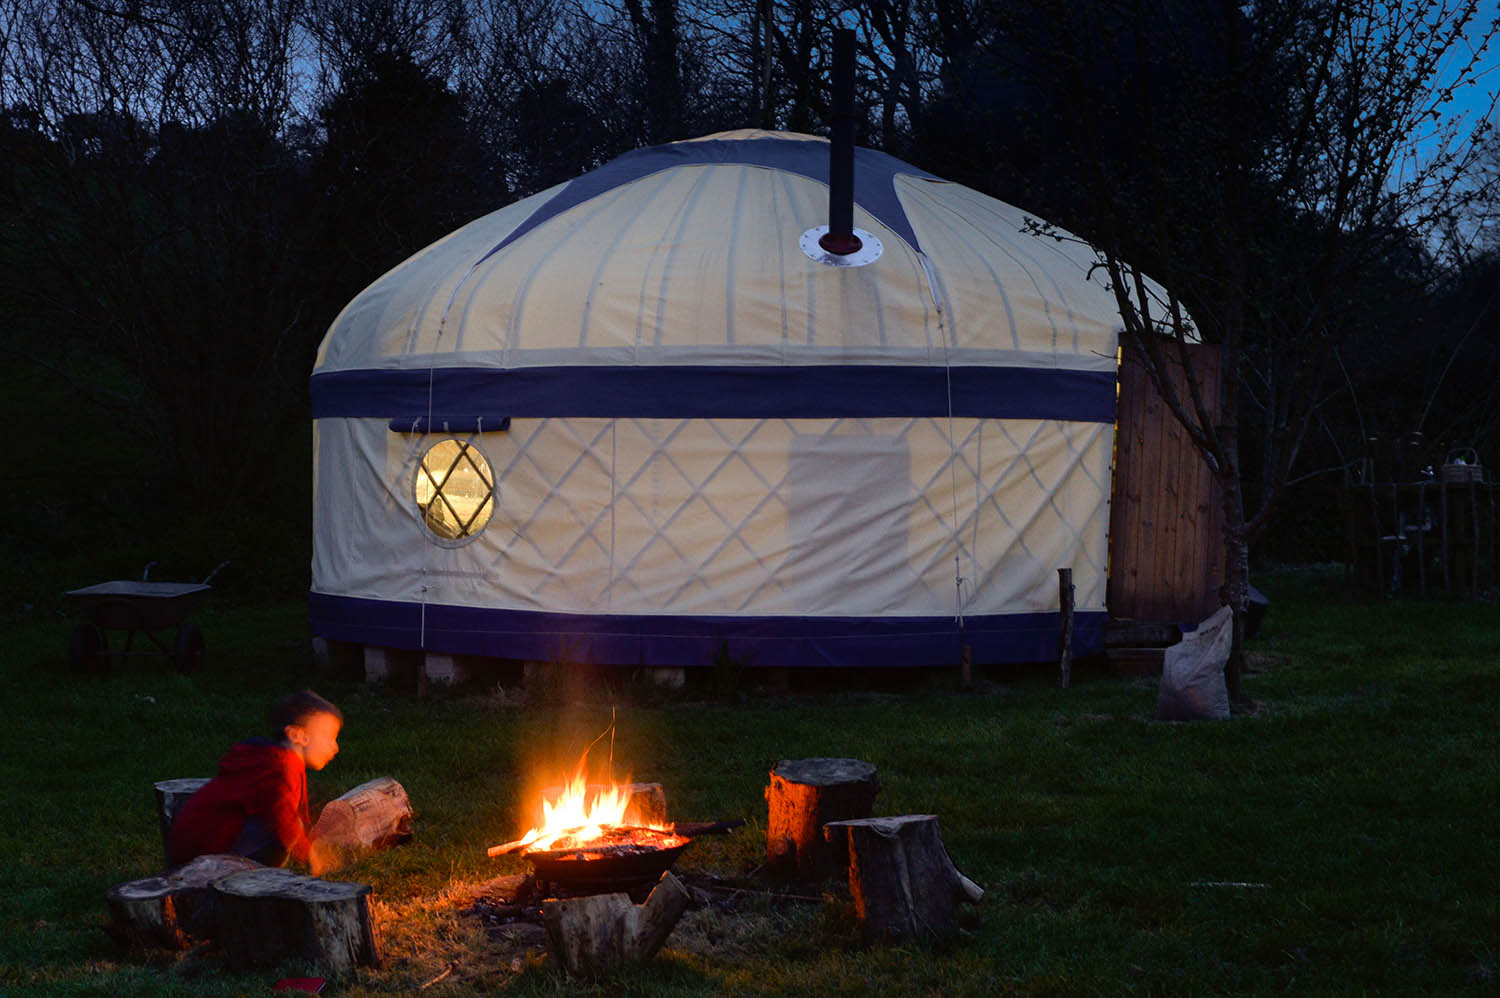  Cotna Eco Retreat’s glamping site in Cornwall has yurts with fire bowls and plenty of space. Cotna’s glamping yurts are a walk away from sandy beaches at Portmellon and Gorran Haven, and a short drive from Mevagissey and the Lost Gardens of Heligan.